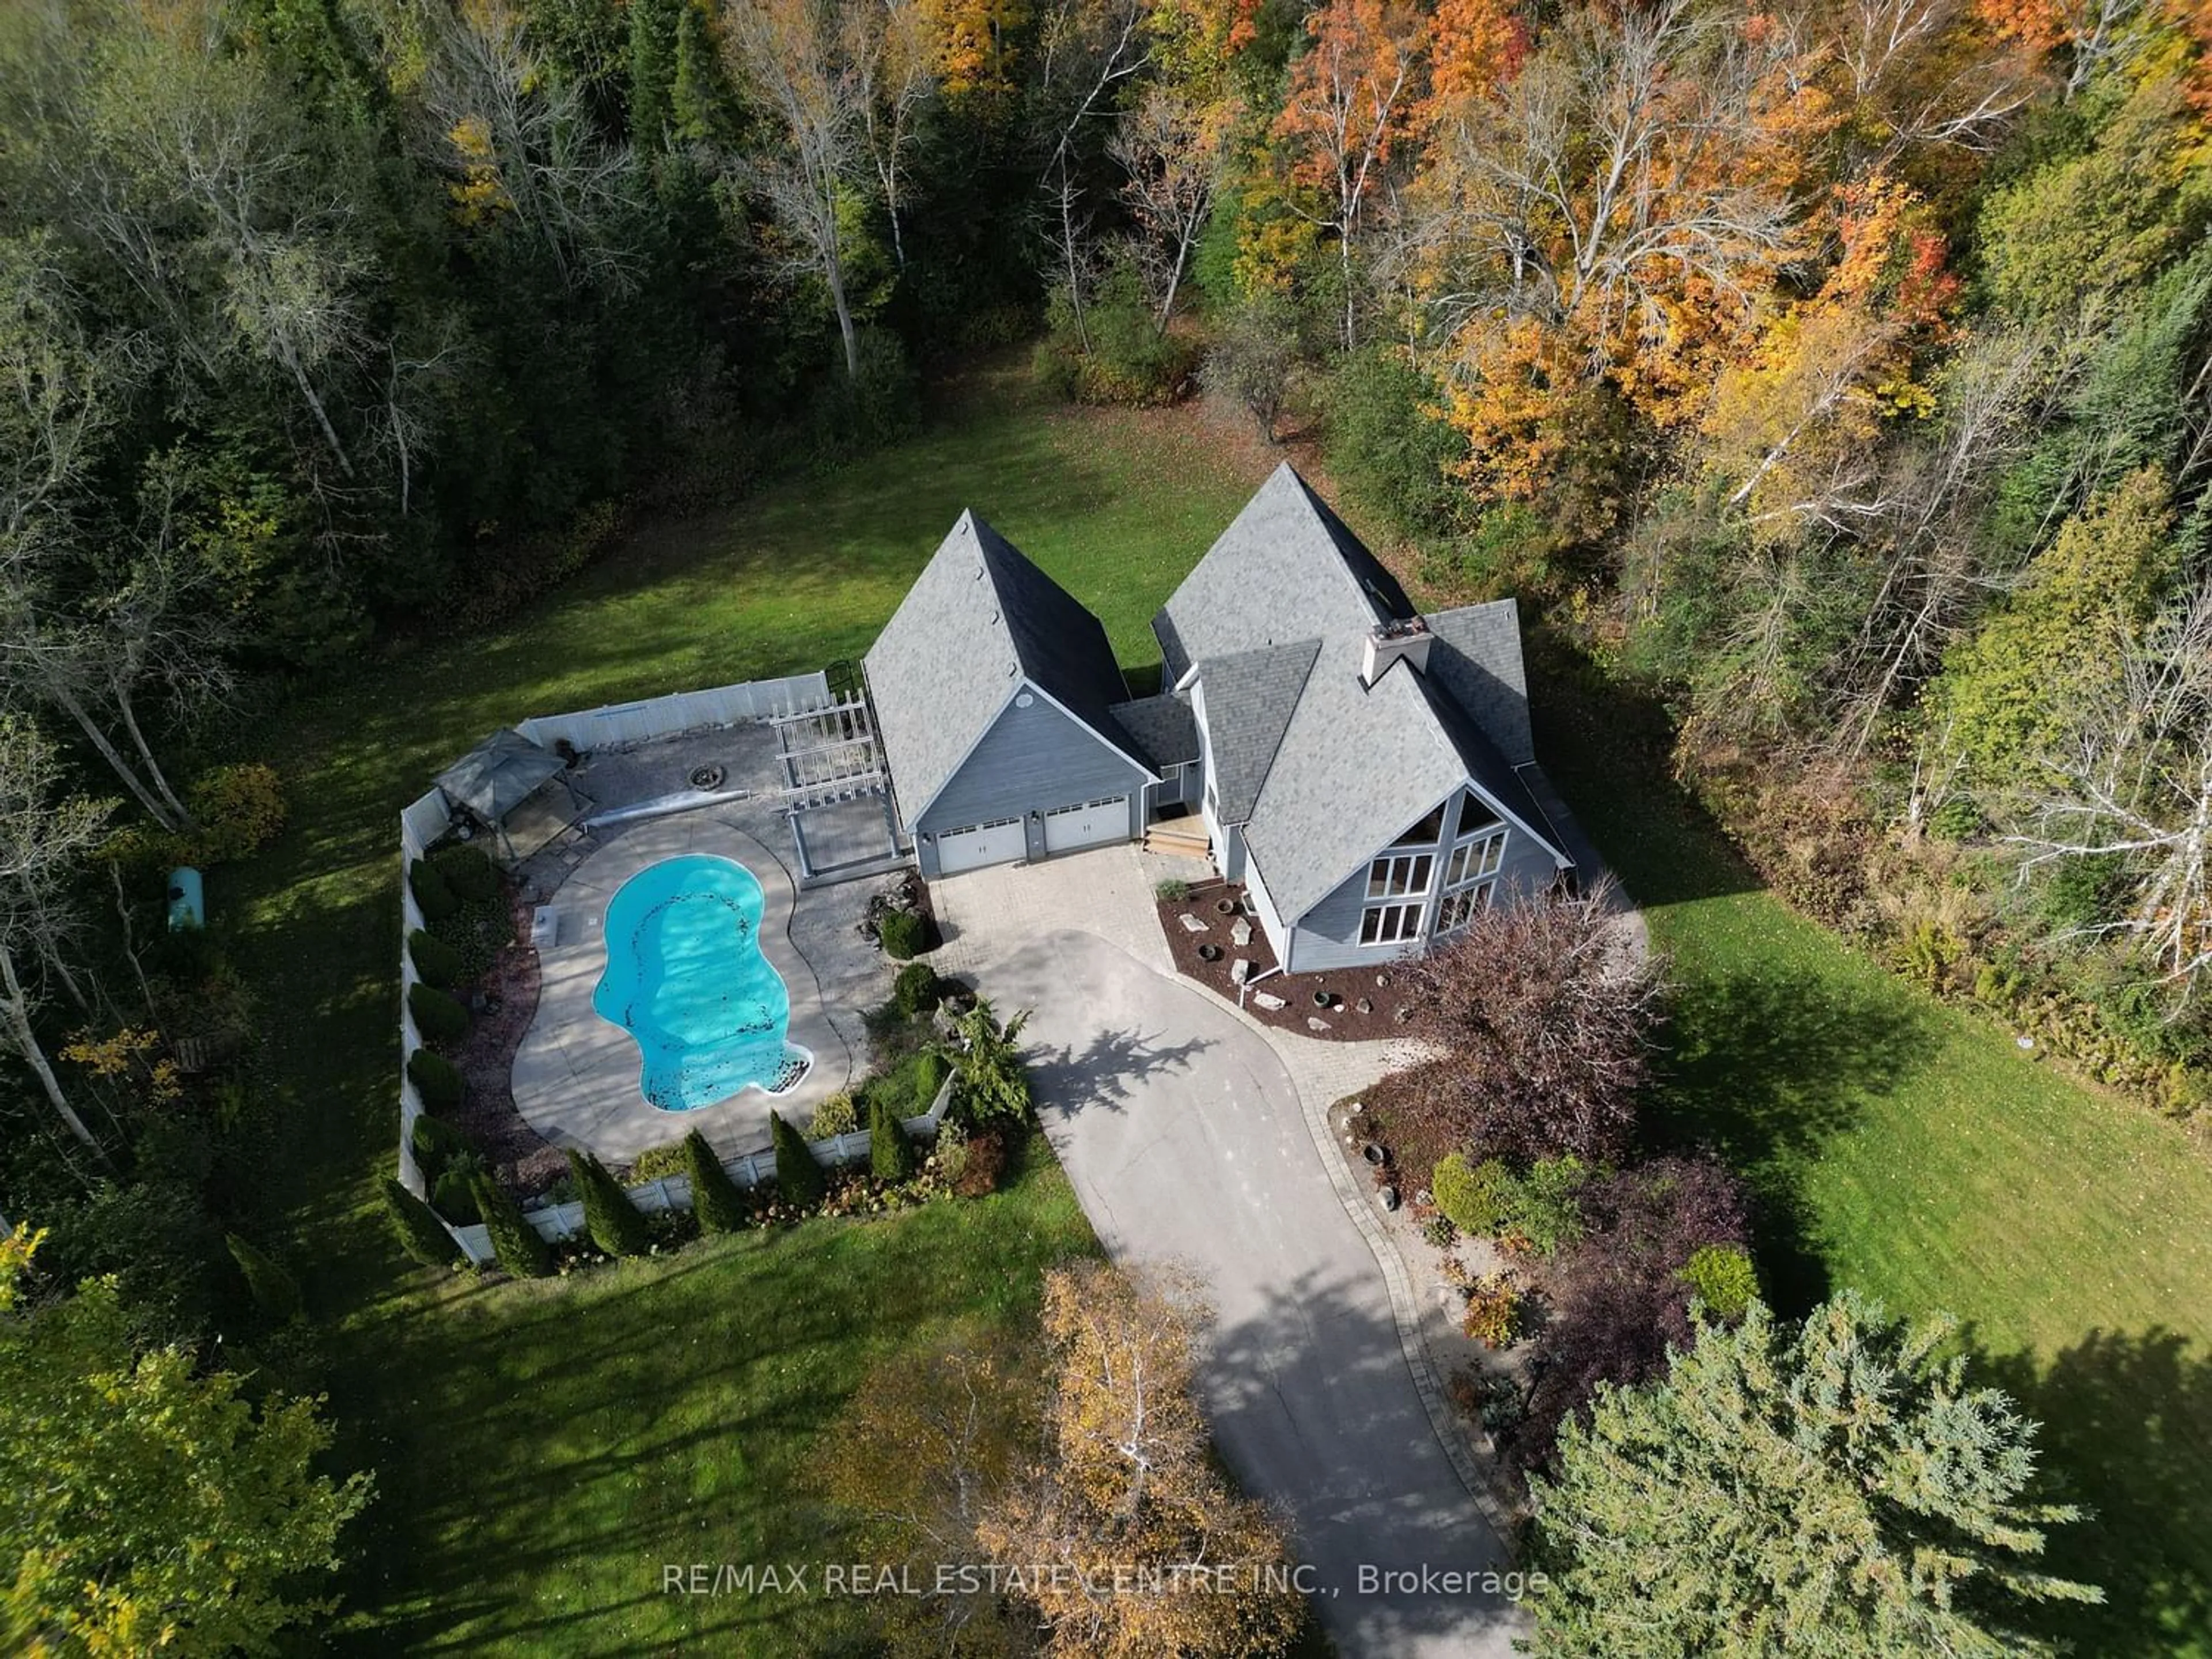 Indoor or outdoor pool for 373376 6th Line, Amaranth Ontario L9W 0M5